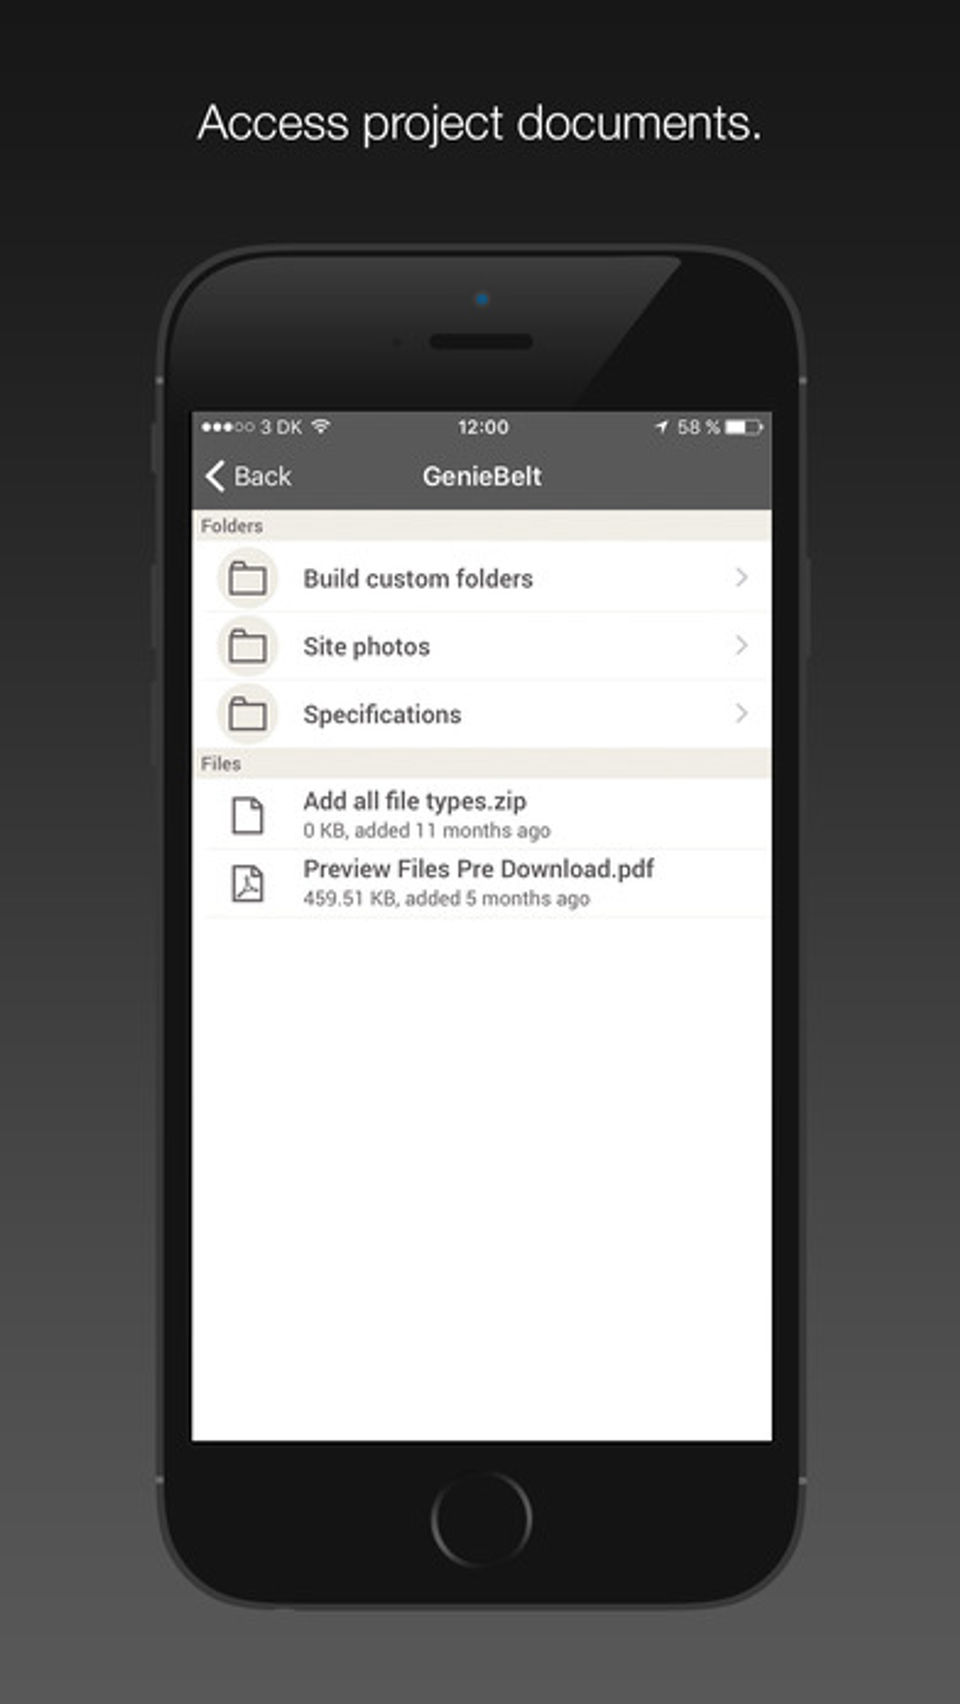 GenieBelt screenshot: Access project documents from a mobile device